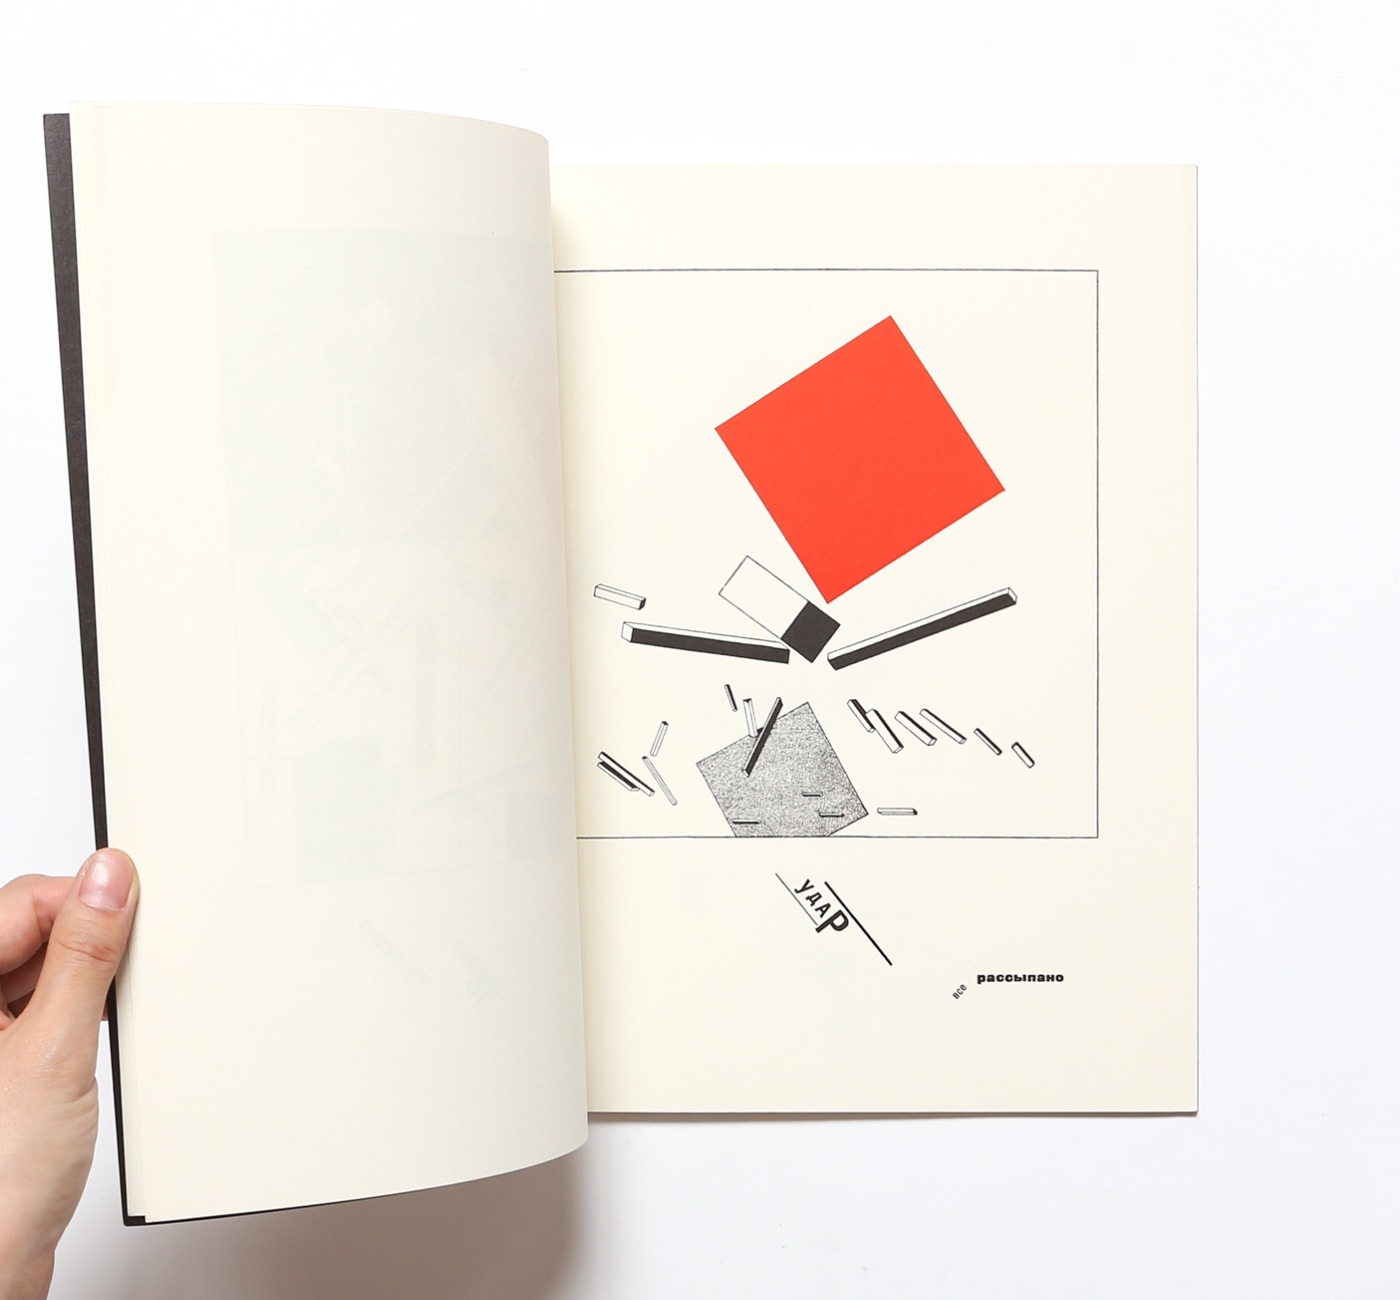 El Lissitzky: From Two Quadrants